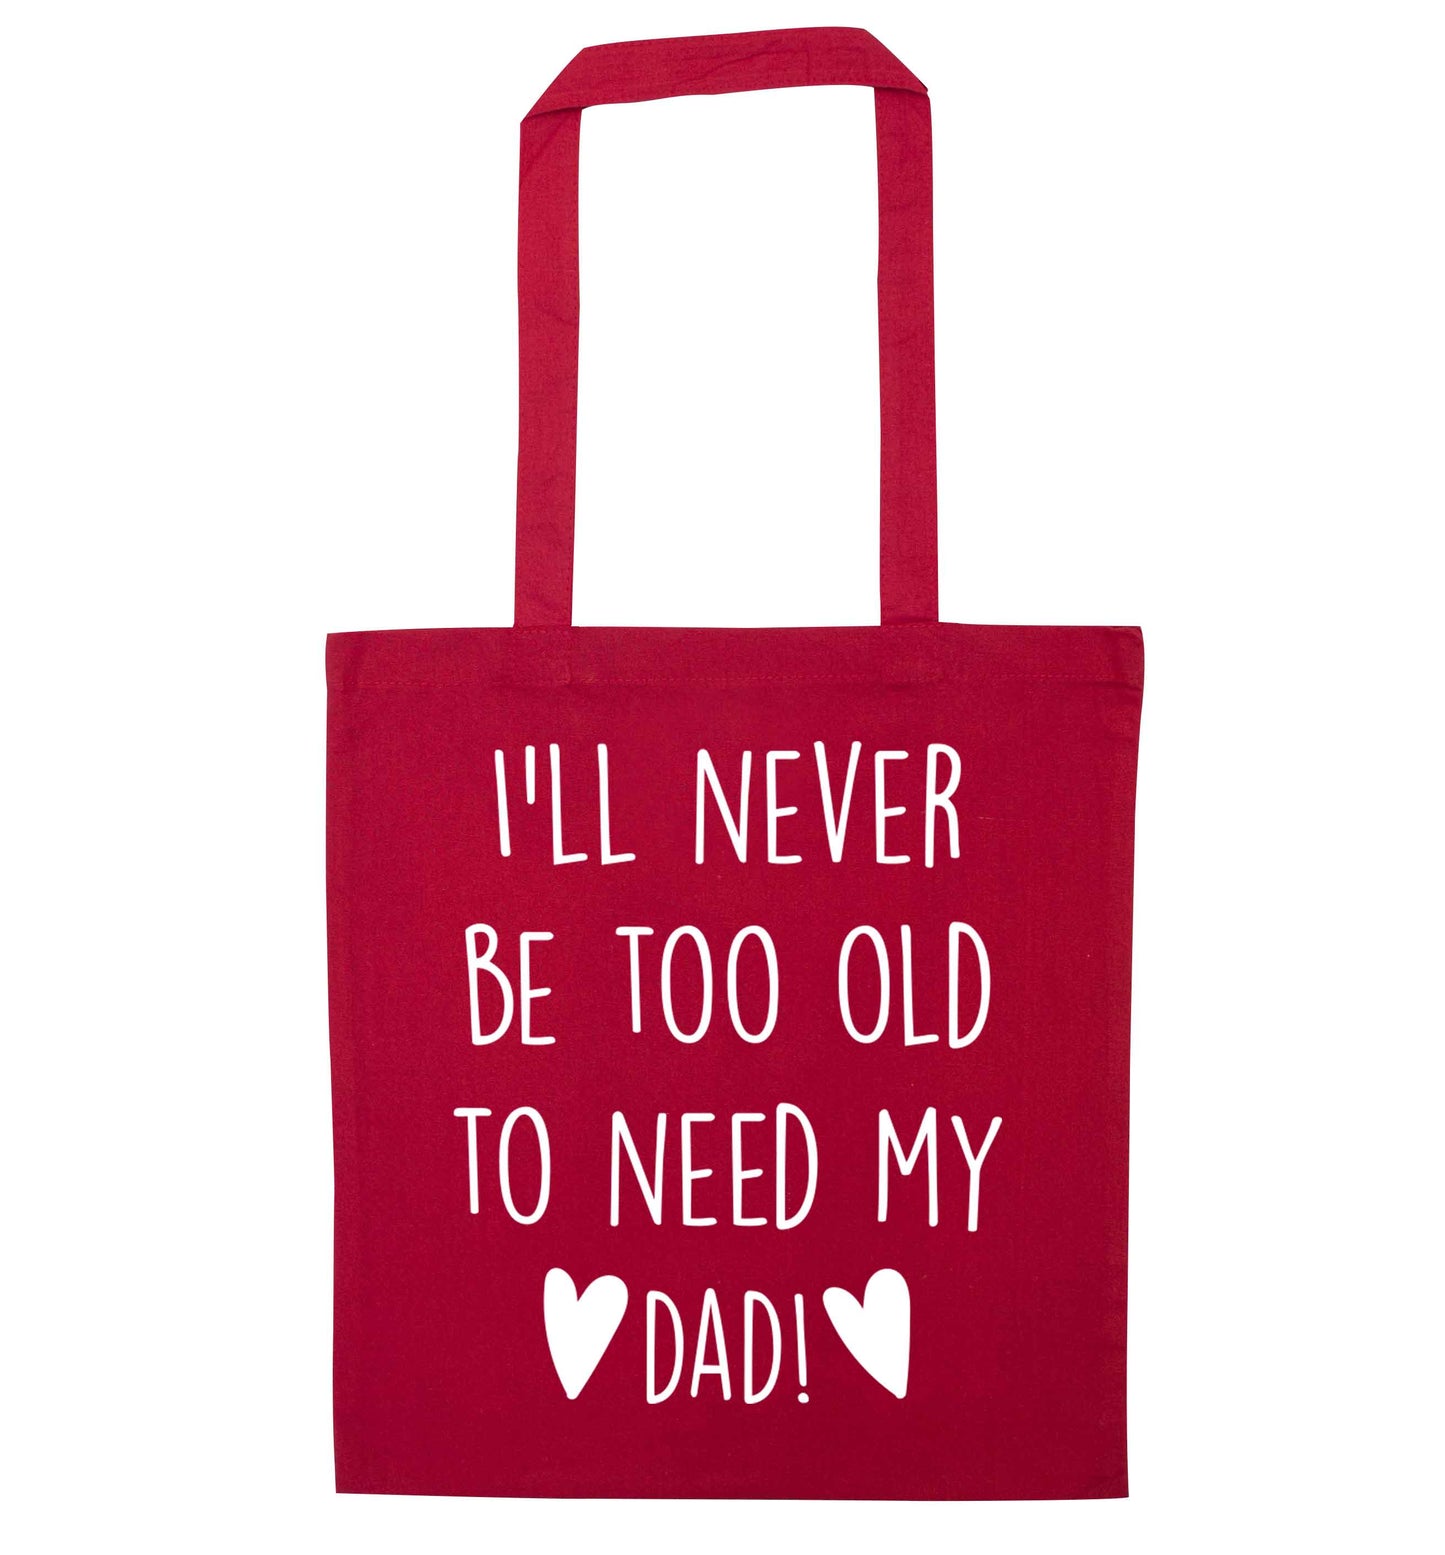 I'll never be too old to need my dad red tote bag